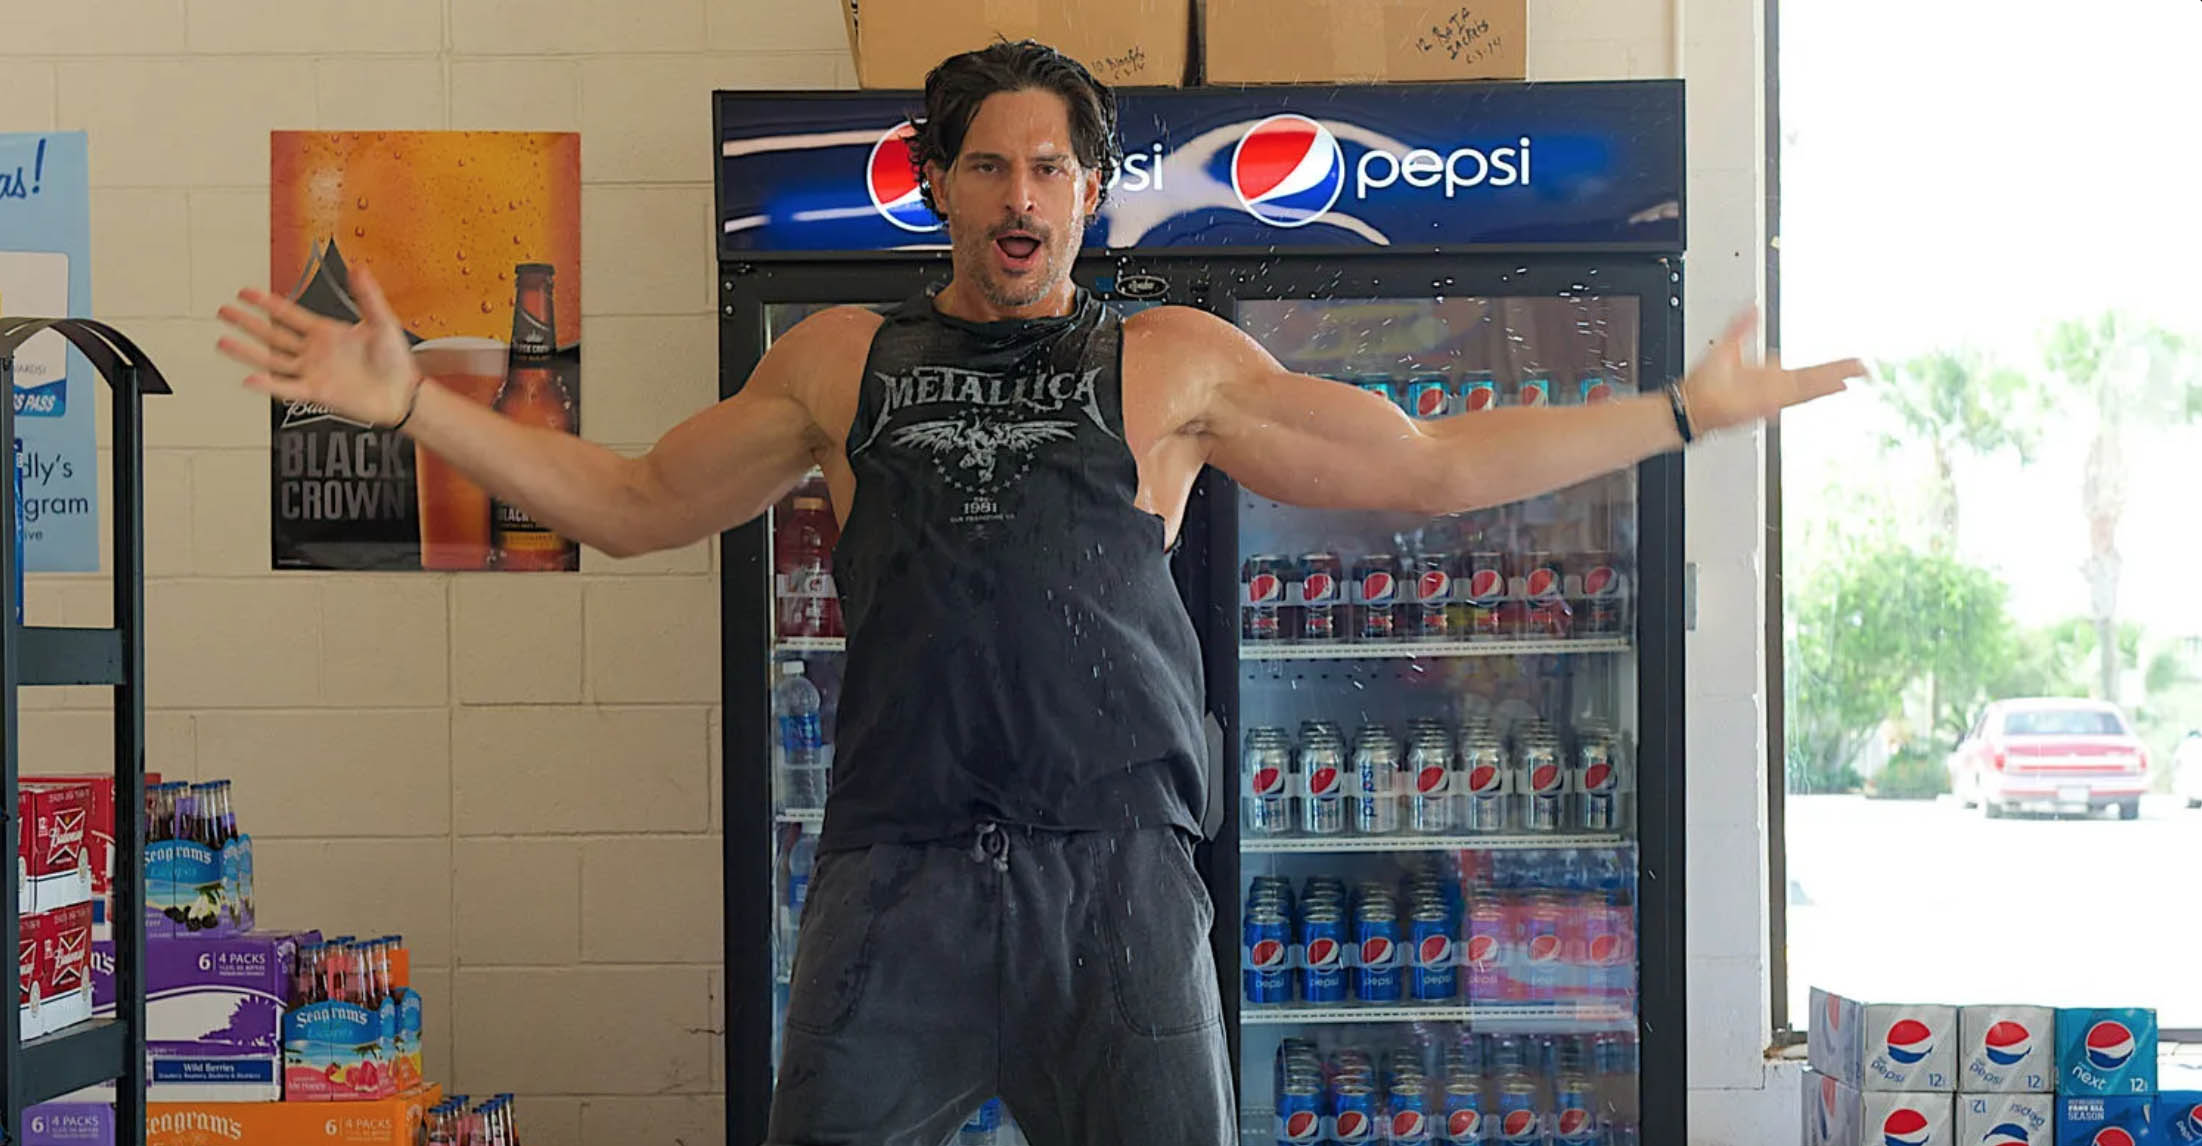 <p>In Magic Mike XXL, Joe Manganiello's Richie is on a quest to reclaim his mojo, so when he struts into that gas station like a sexy superhero and the Backstreet Boys hit the soundtrack you know it's ON.</p>  <p>As the familiar chorus fills the airwaves, Richie's gyrations become a dance of desire, a testament to the film's progressive feminist stance. It's a brilliantly tongue-in-cheek moment that celebrates feminine desire and male camaraderie with infectious humor. Richie's friends cheer him on, elevating his bold performance into a triumphant act of self-assurance.</p>  <p>In this scene, "I Want It That Way" becomes more than just a pop hit; it's an anthem of empowerment and a reminder that confidence is the ultimate aphrodisiac.</p>